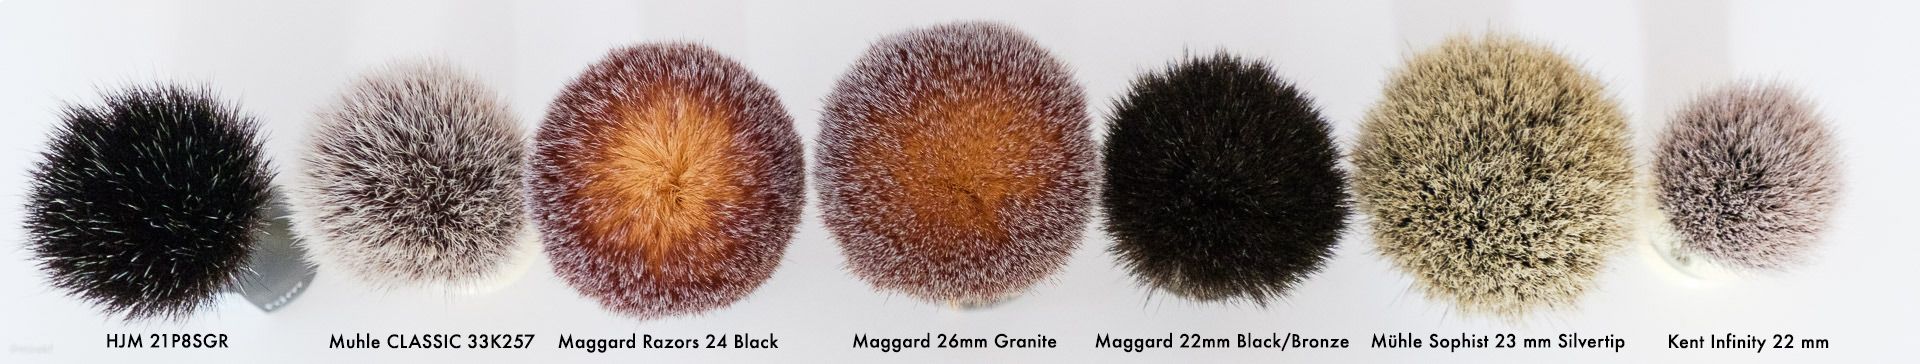 maggard-brush-synthetic-22-comparison-above-all-napisy